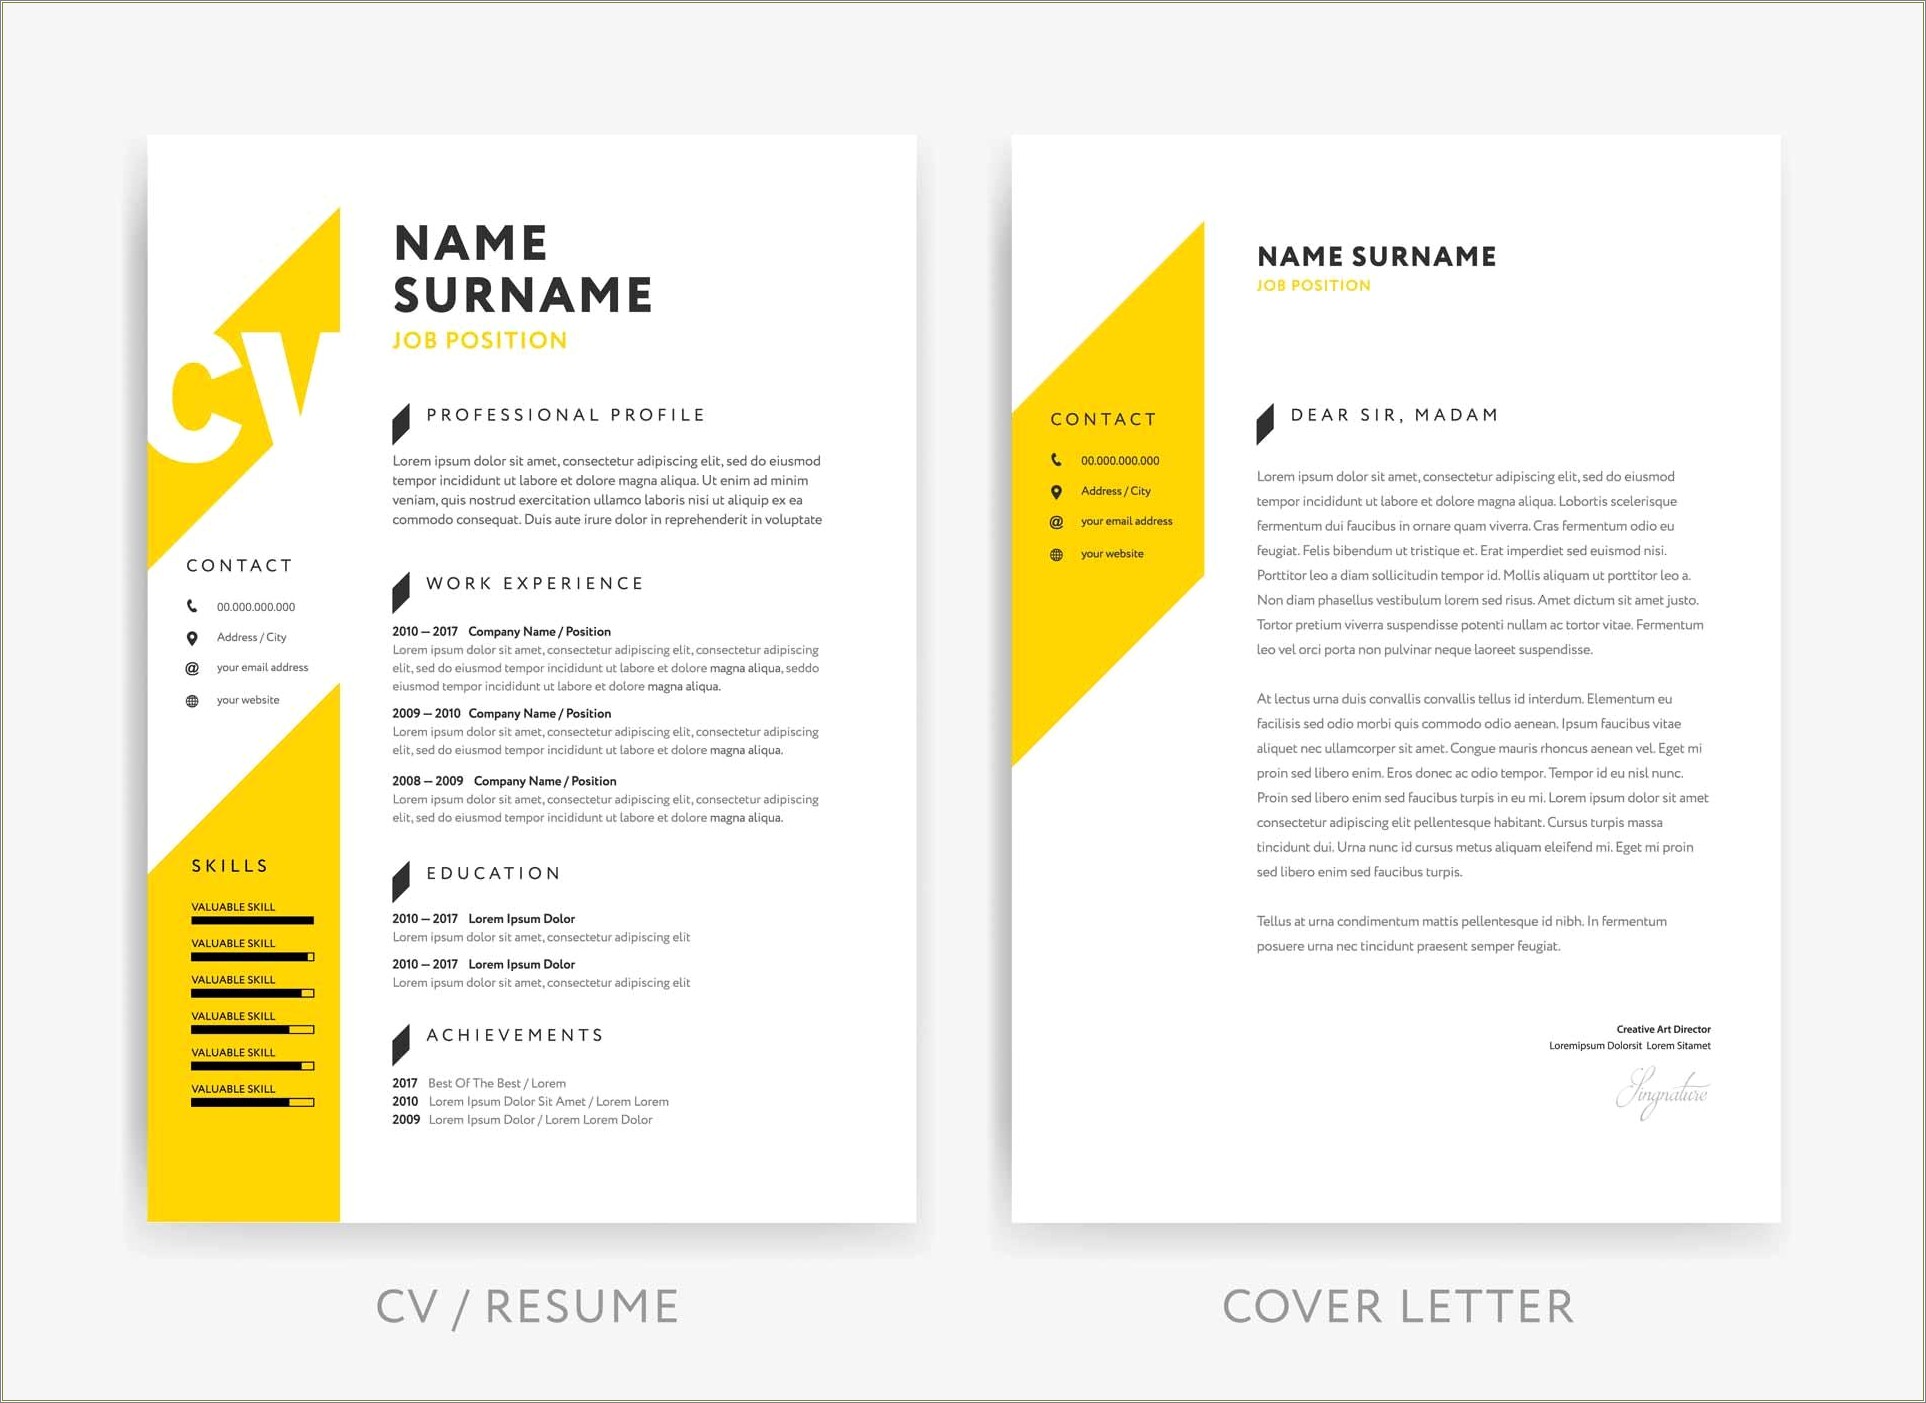 Cover Letter Include Information Not In Resume